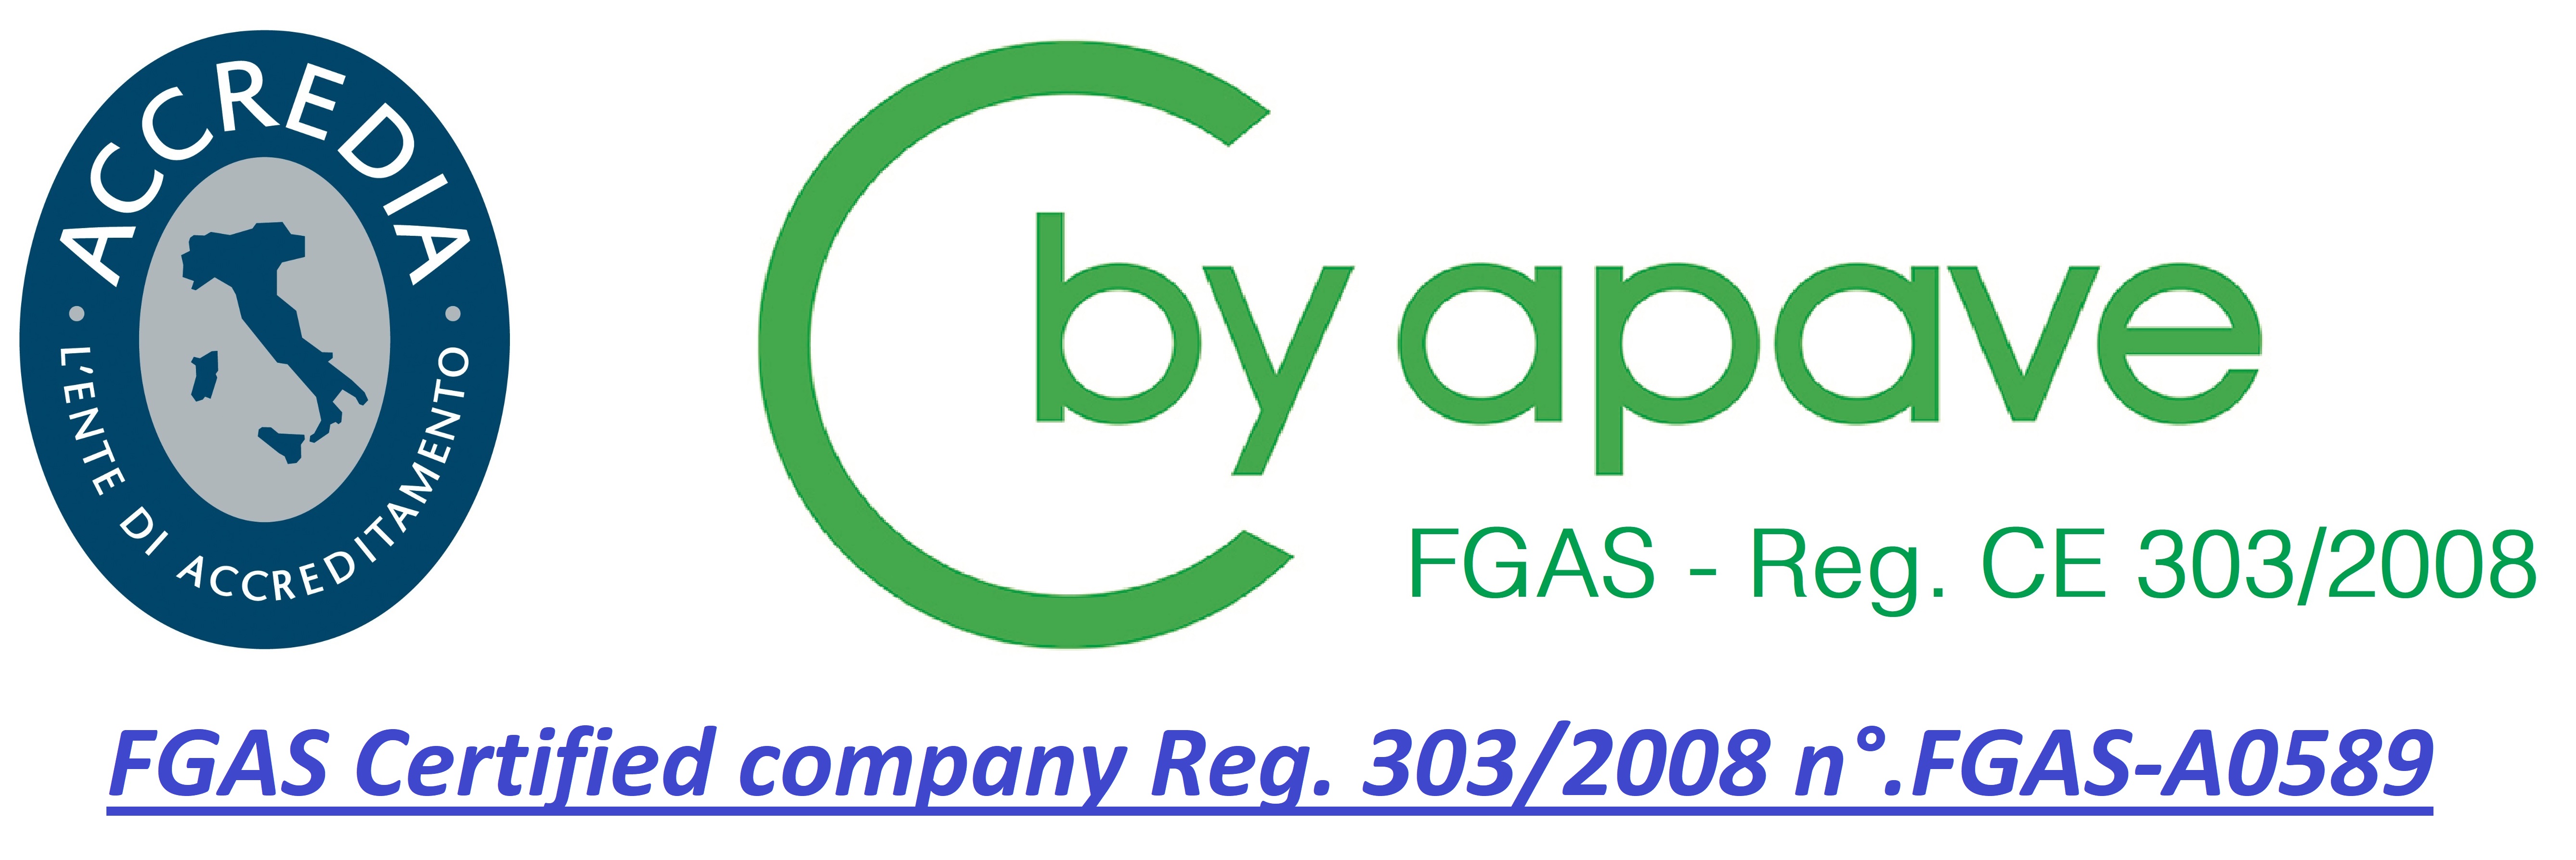 FGAS Certified company